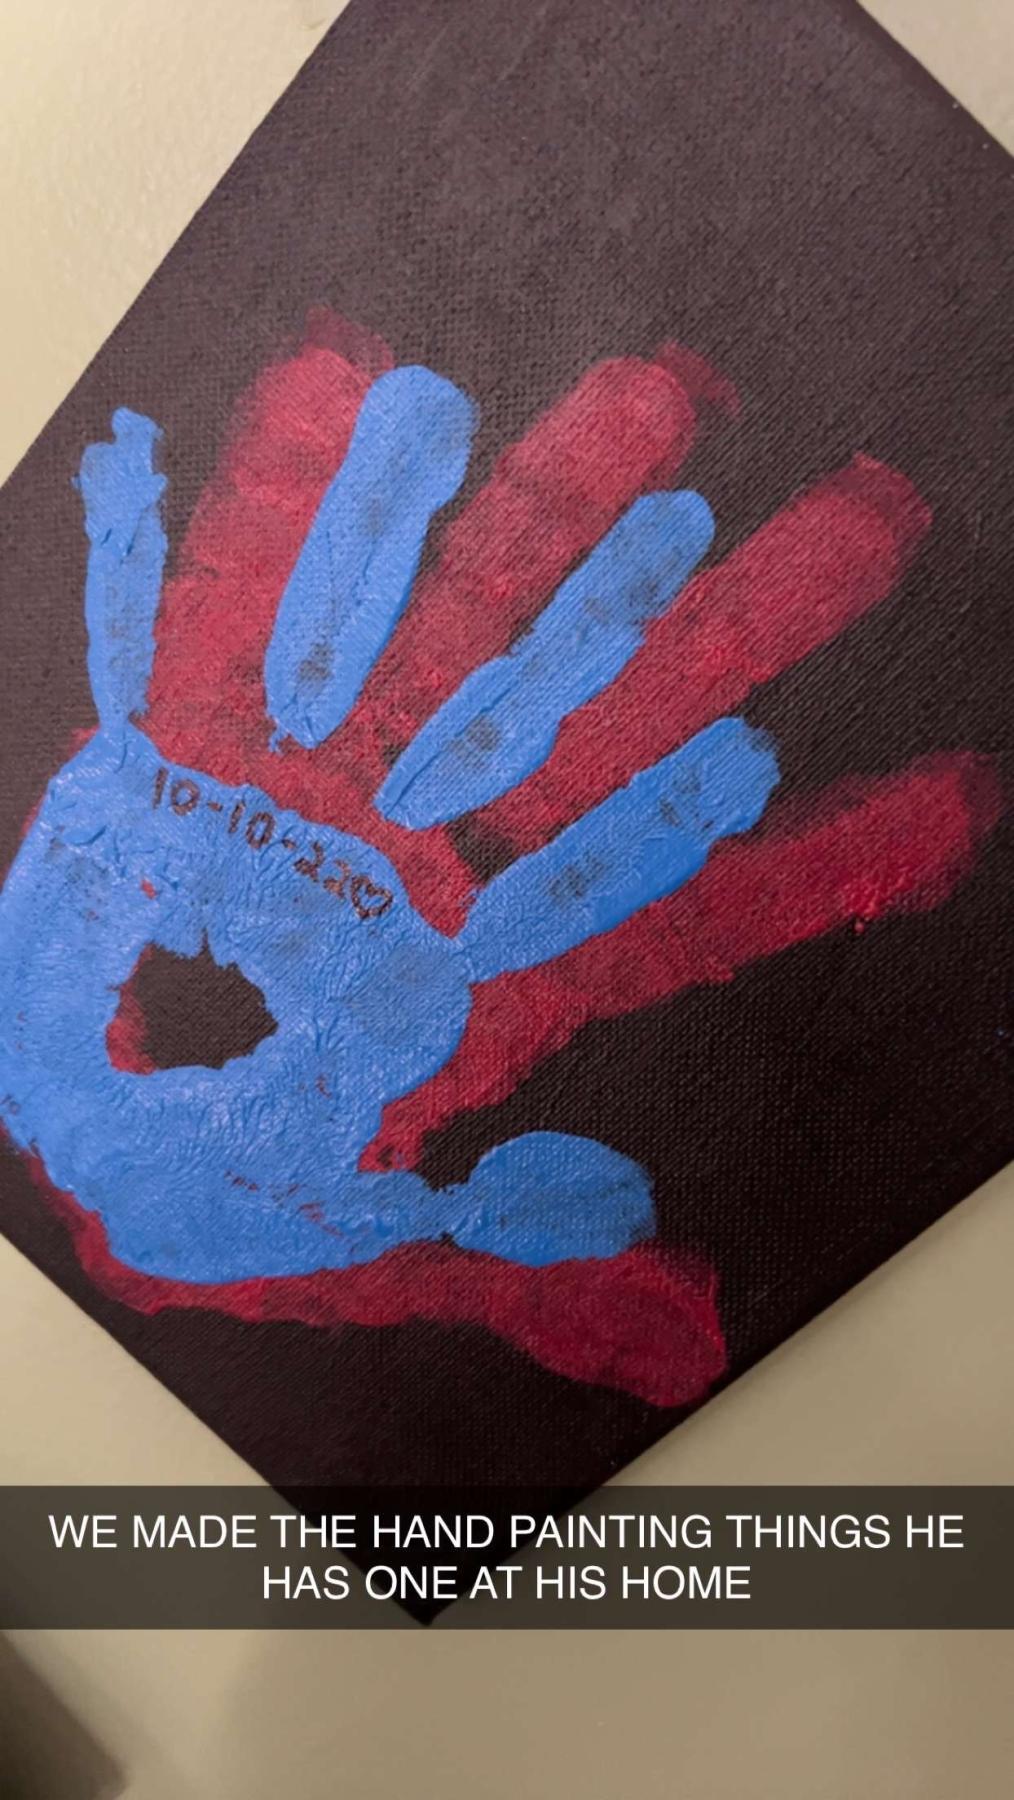 a blue hand surrounded by a red hand